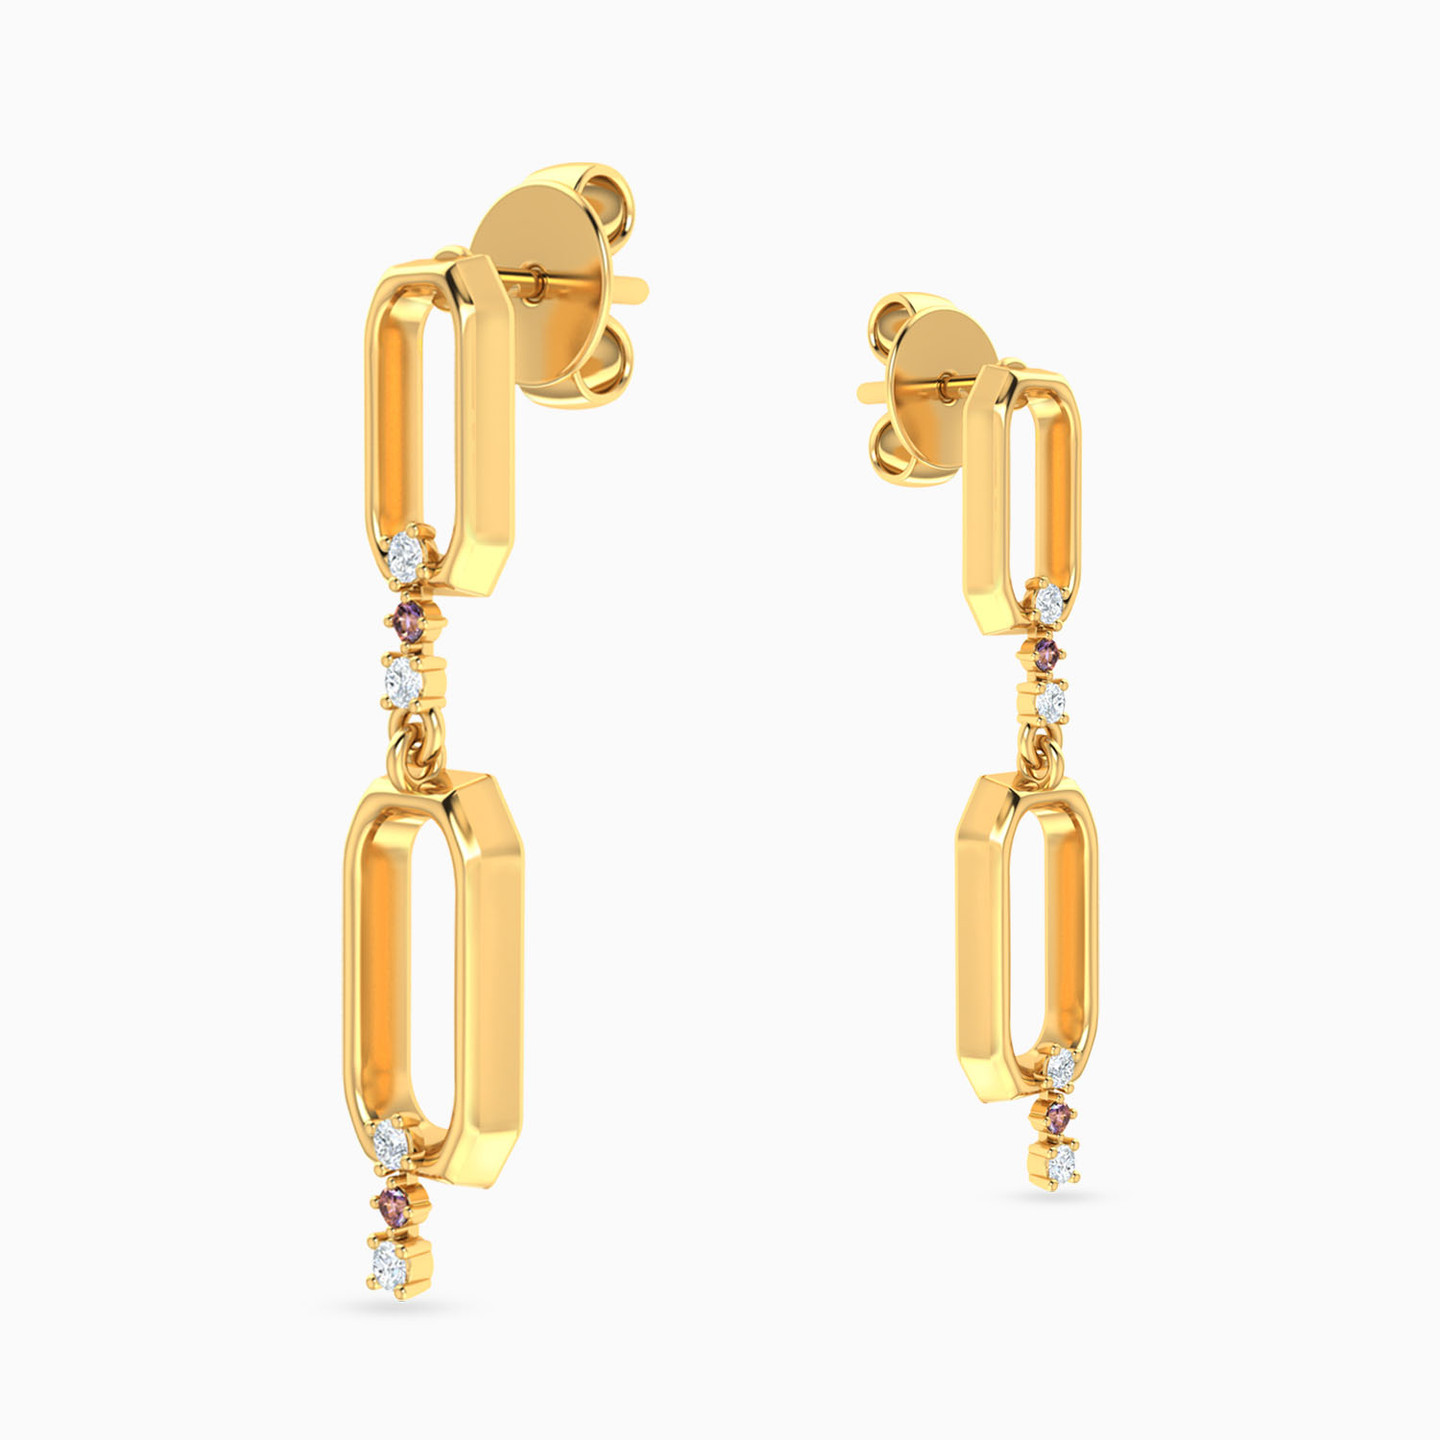 Rectangle Shaped Colored Stones Drop Earrings in 18K Gold - 3